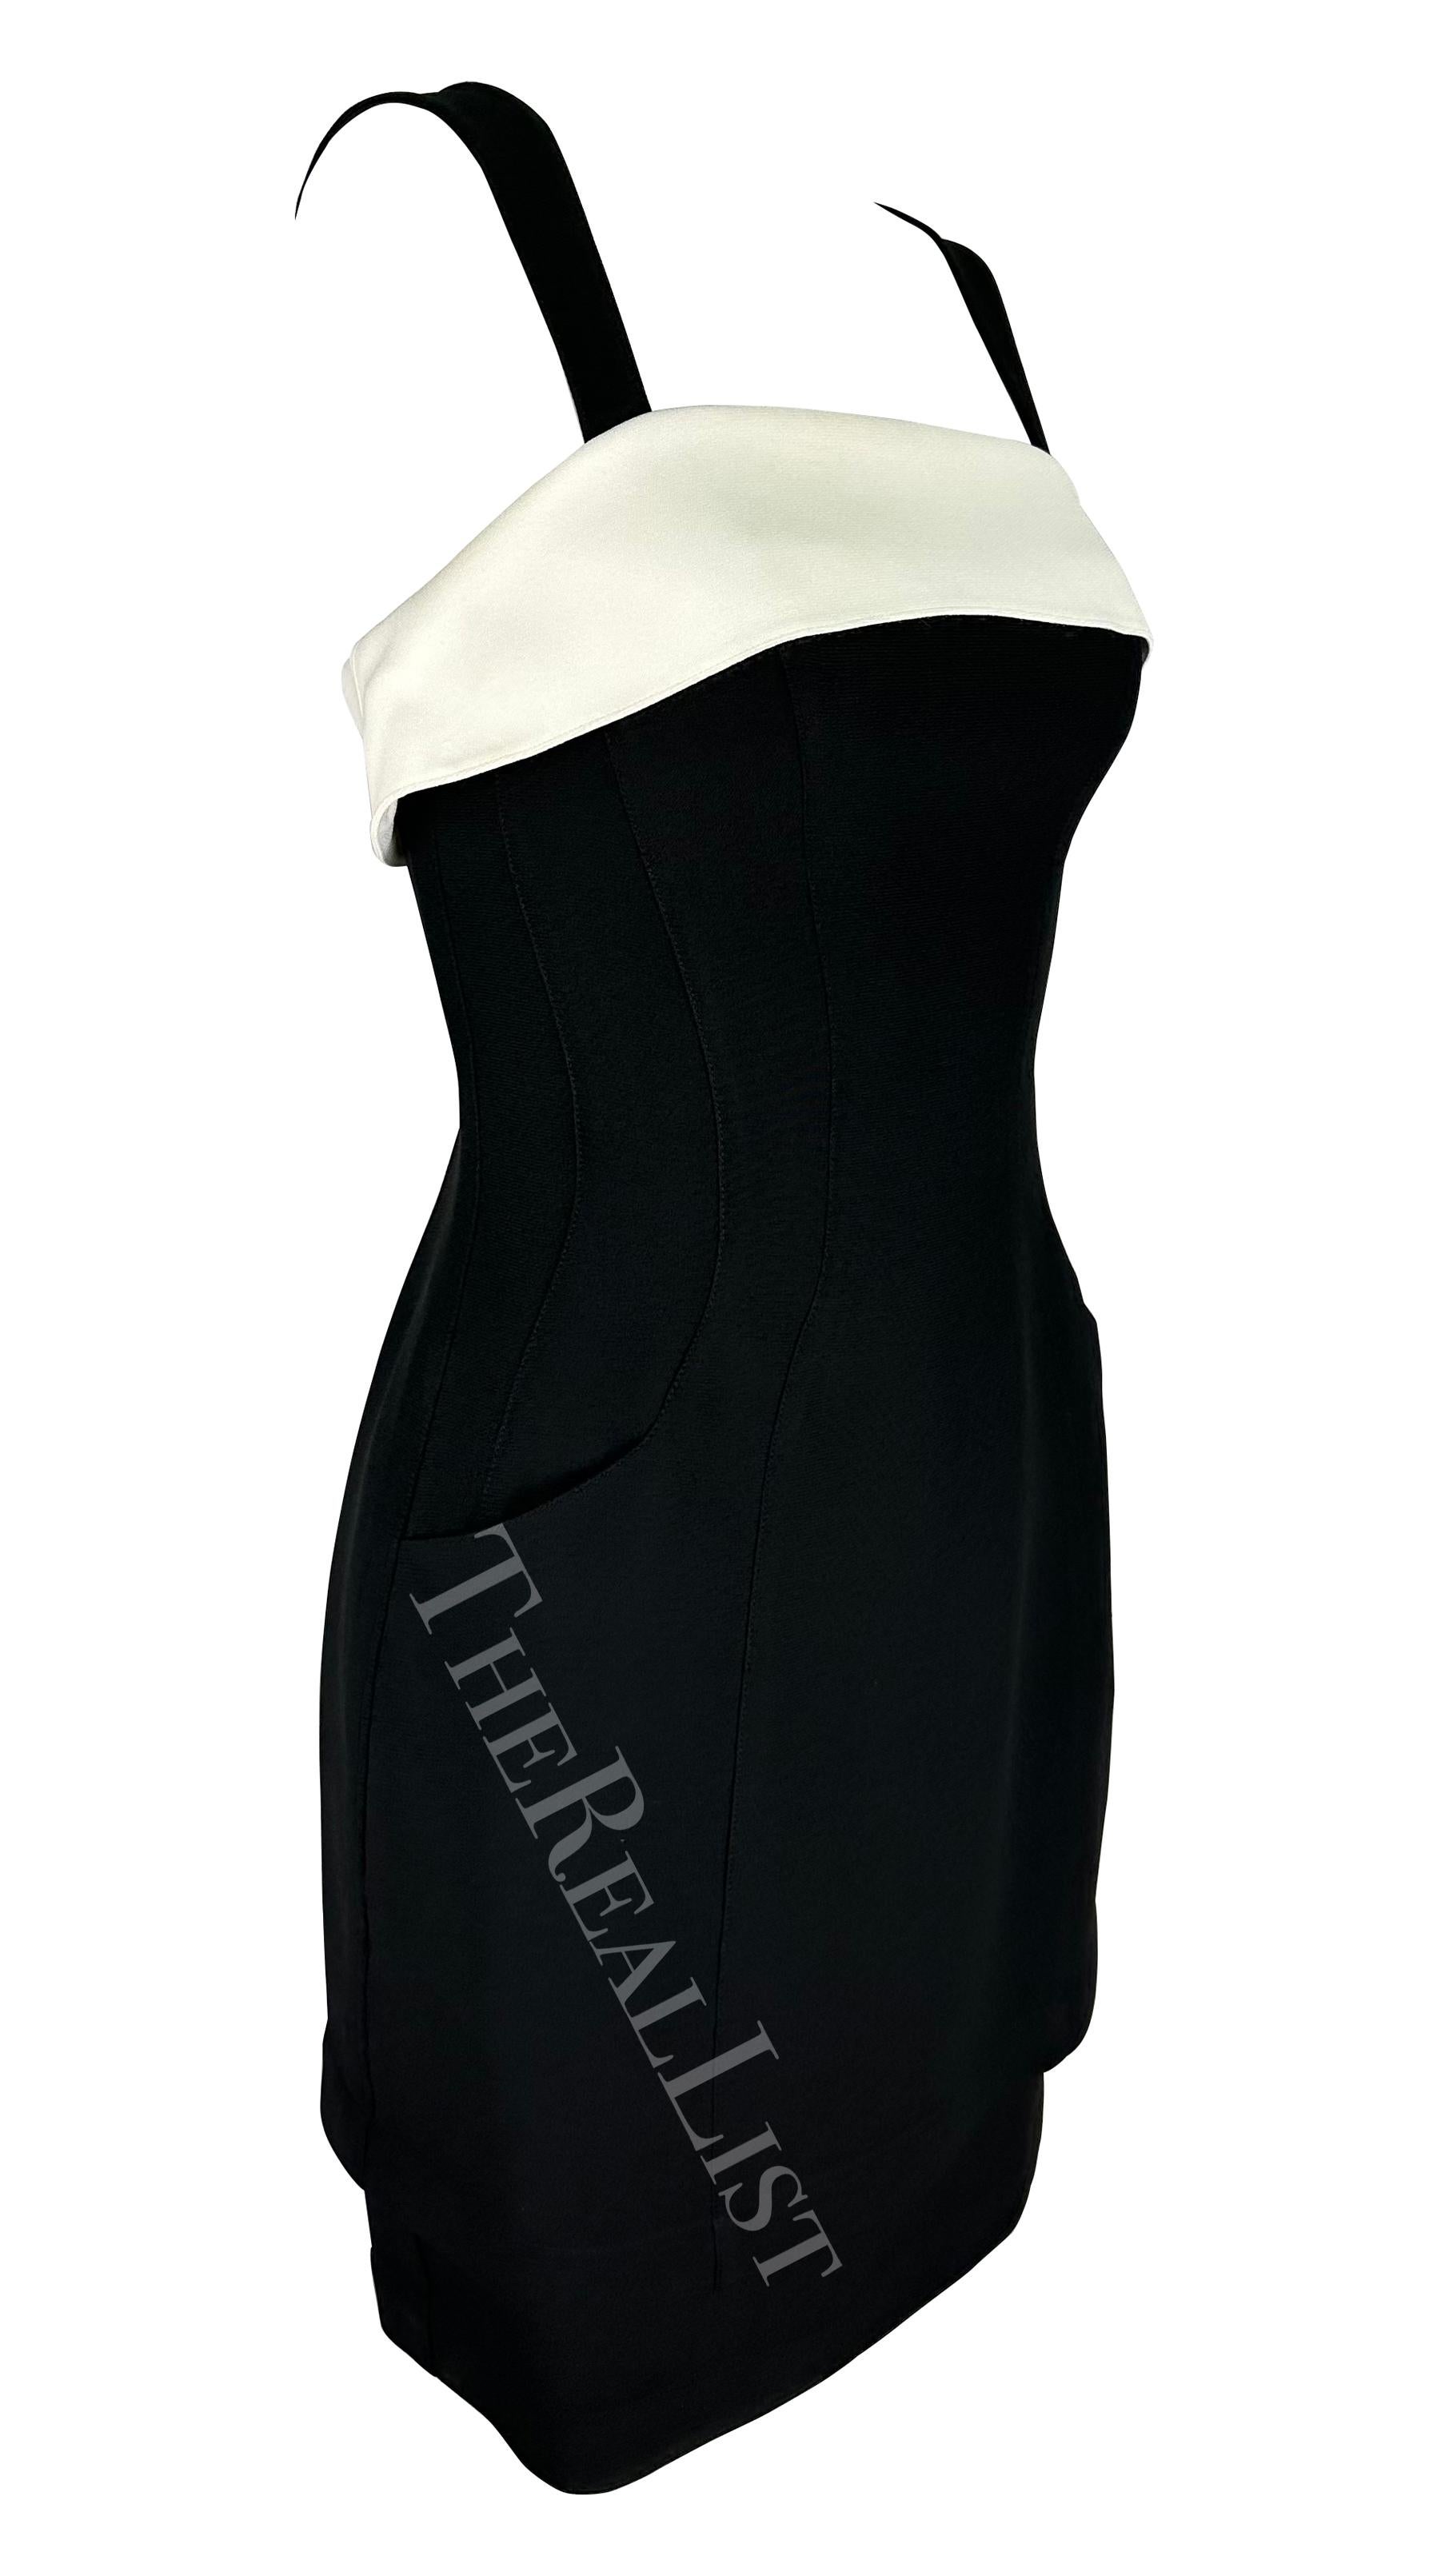 Women's S/S 1996 Thierry Mugler Runway Black White Trim Cinched Mini Dress For Sale